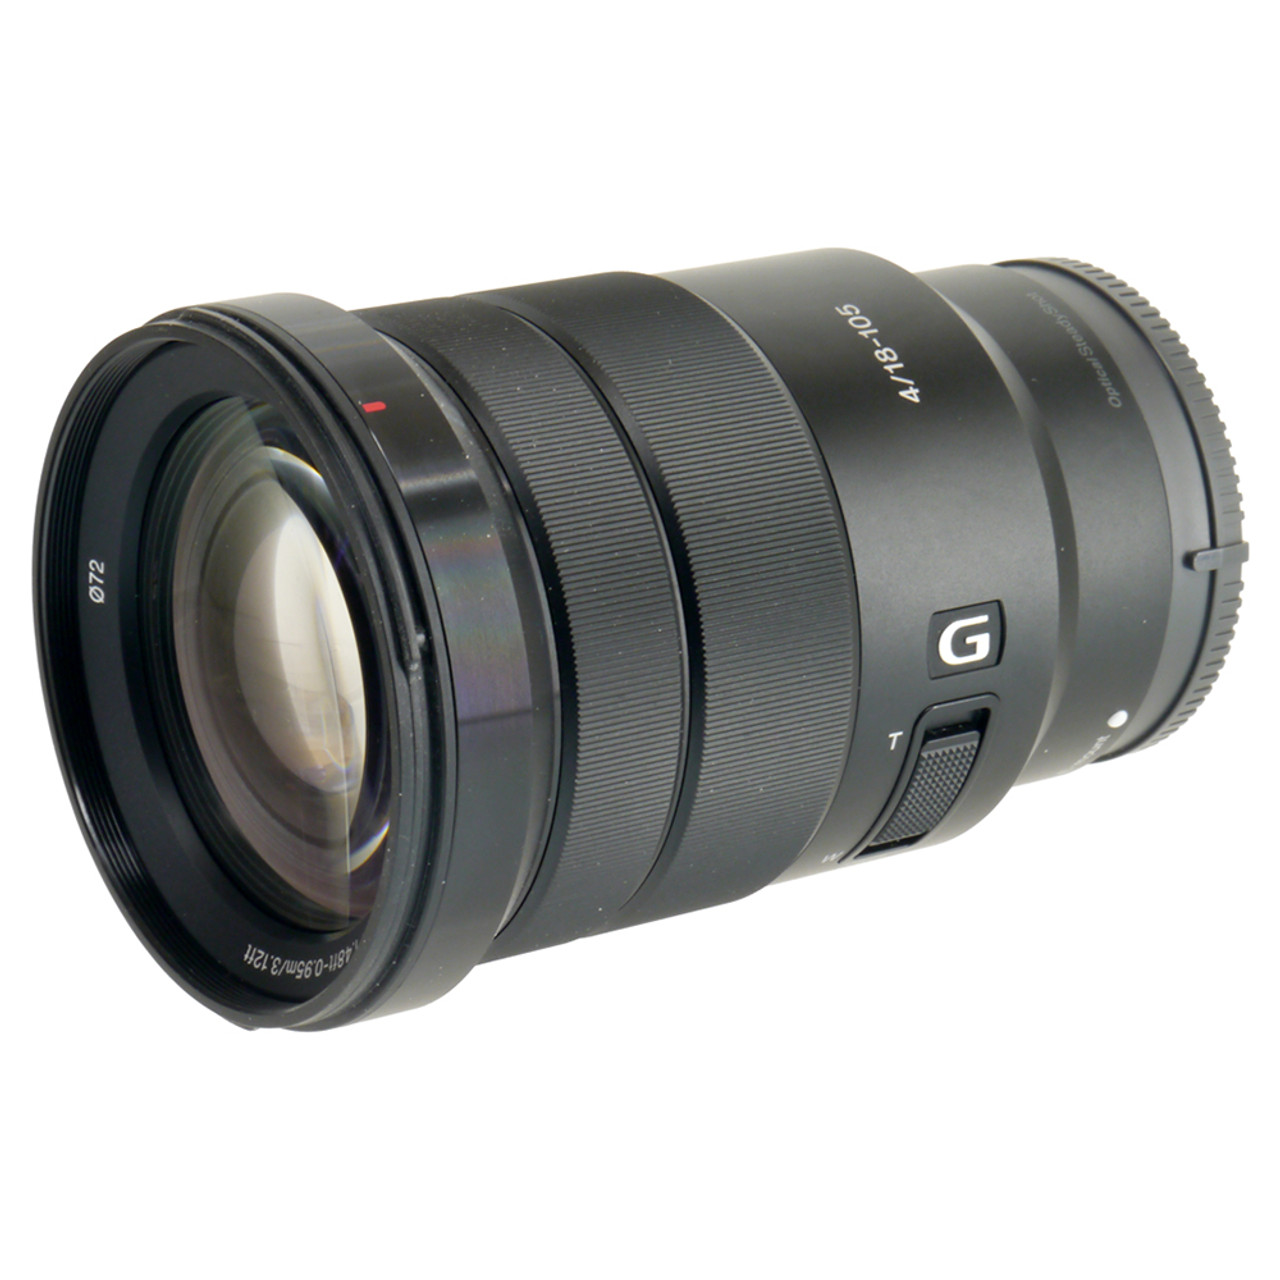 USED SONY E 18-105MM F4 G PZ (763880)